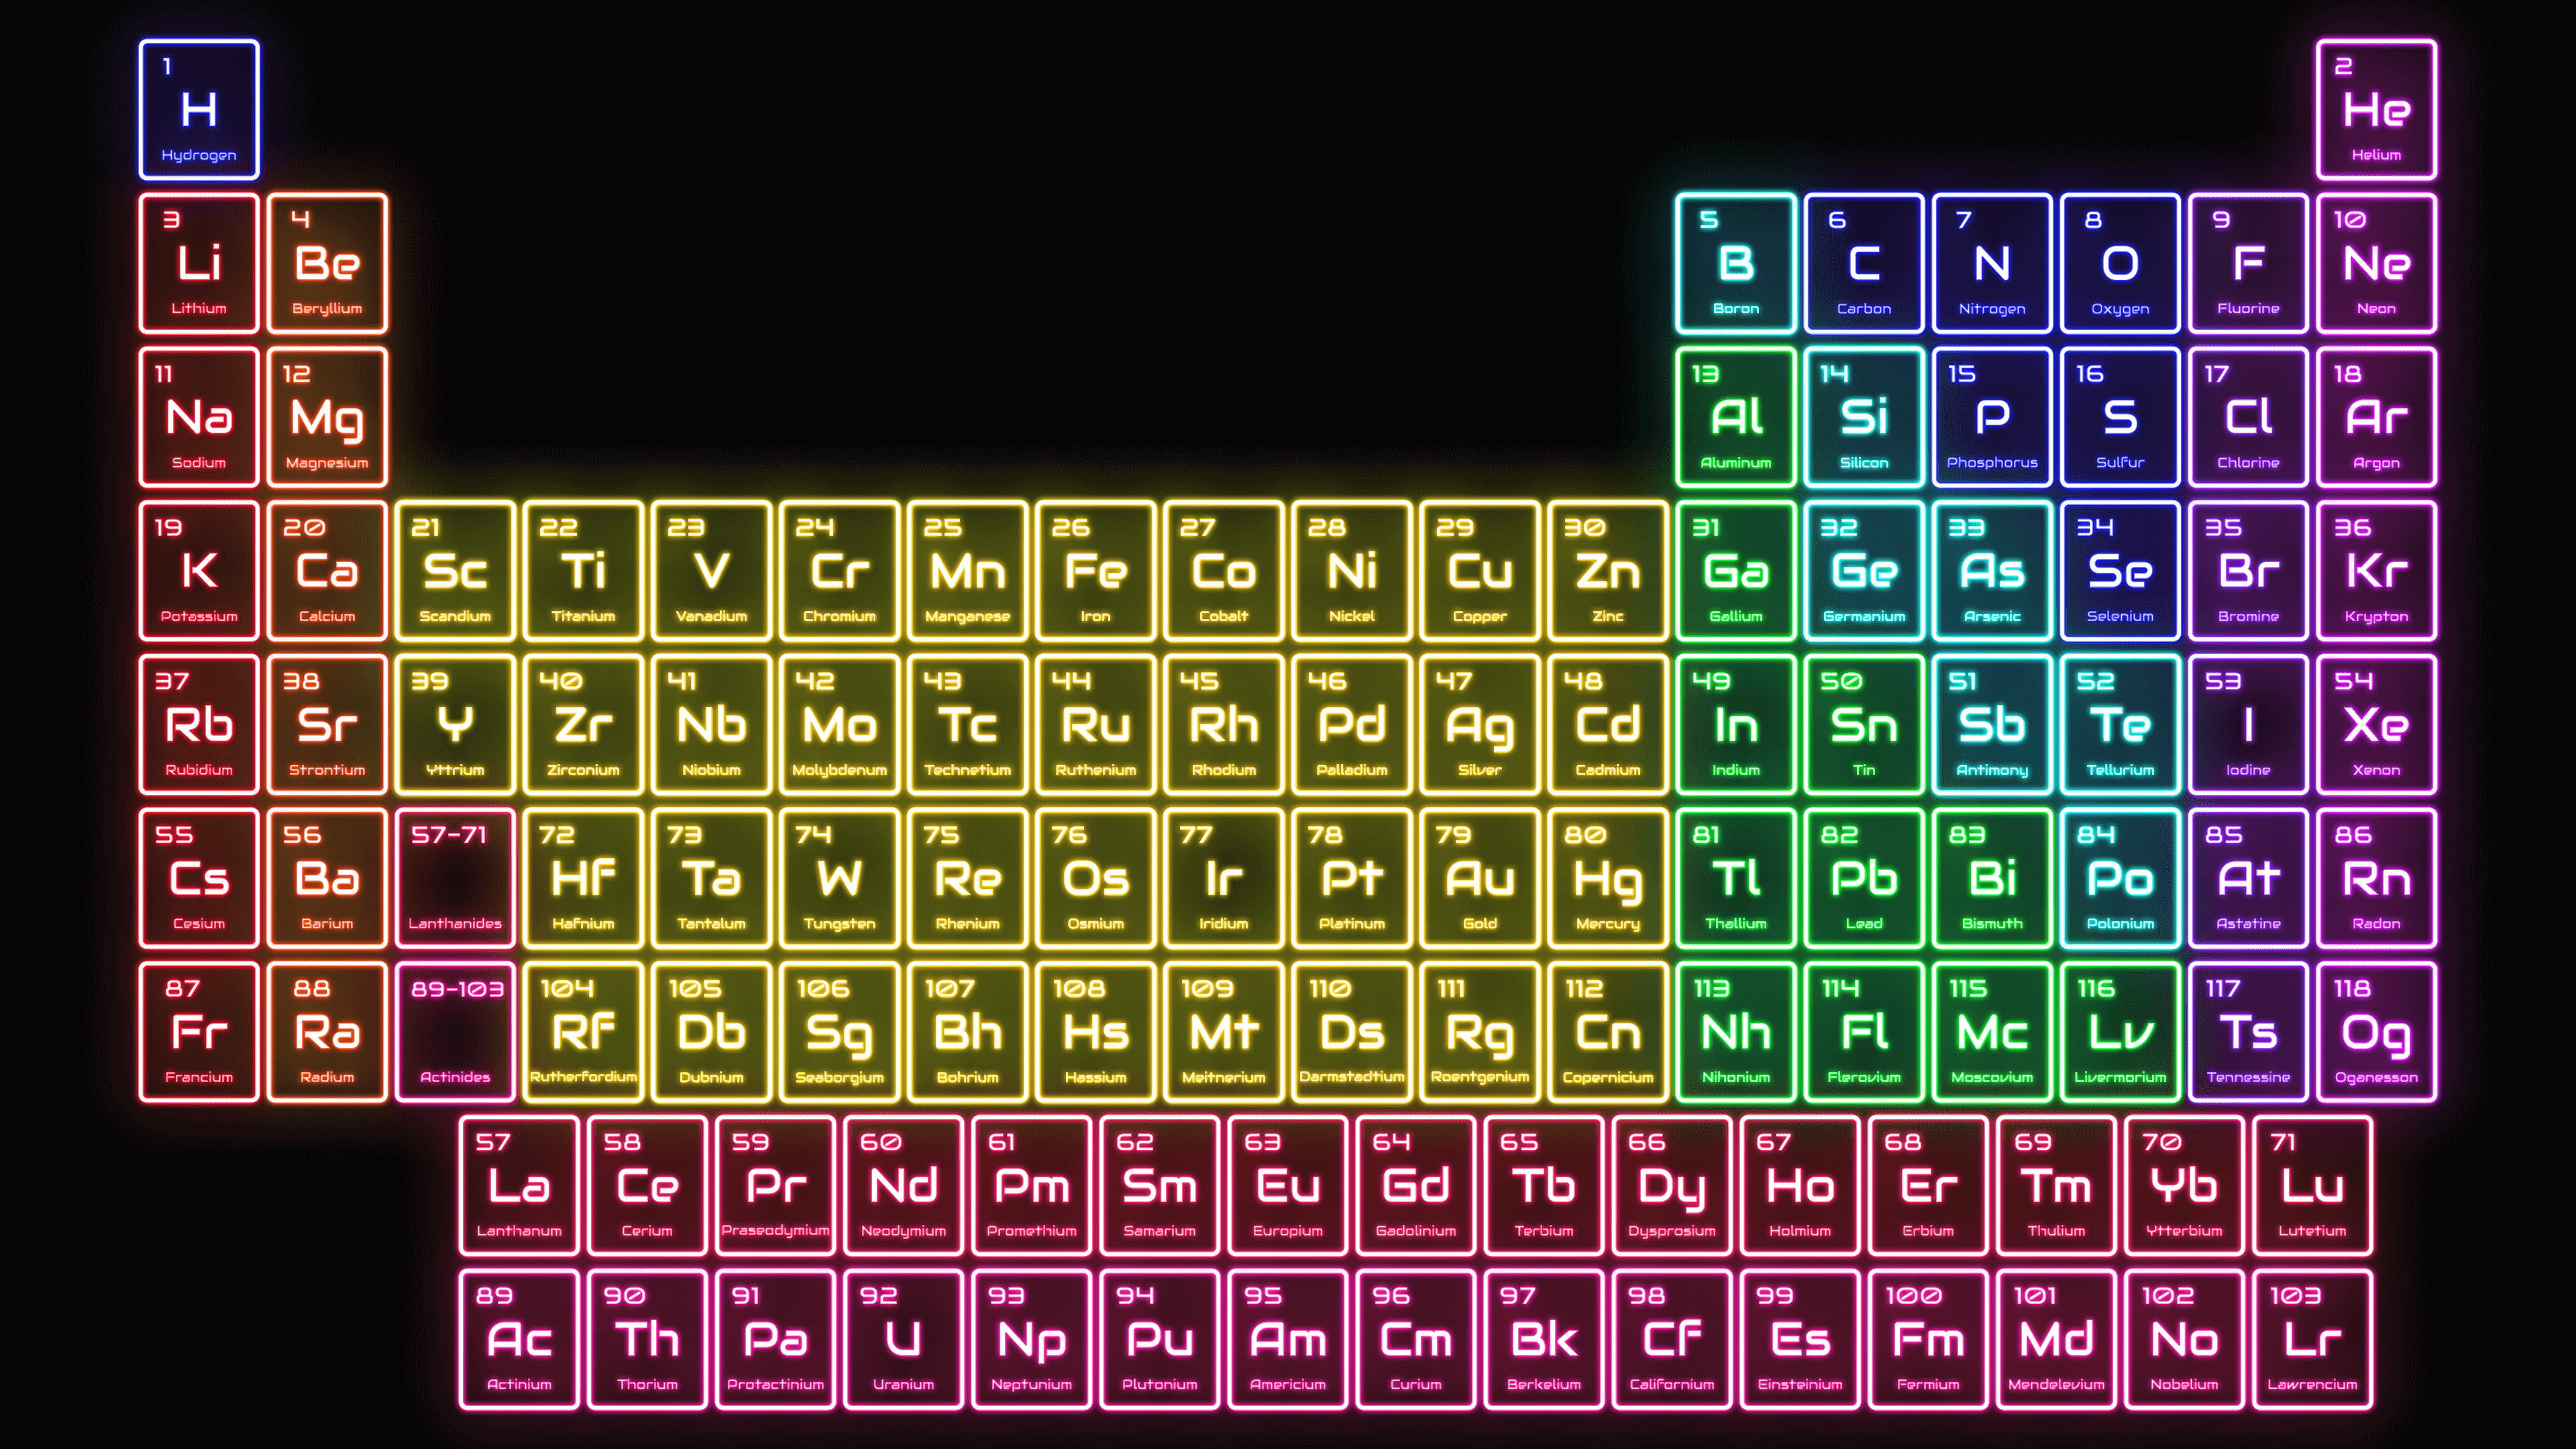 This colorful neon lights periodic table wallpaper shines brightly with a subtle glow. Contai. Neon periodic table, Periodic table, Periodic table of the elements